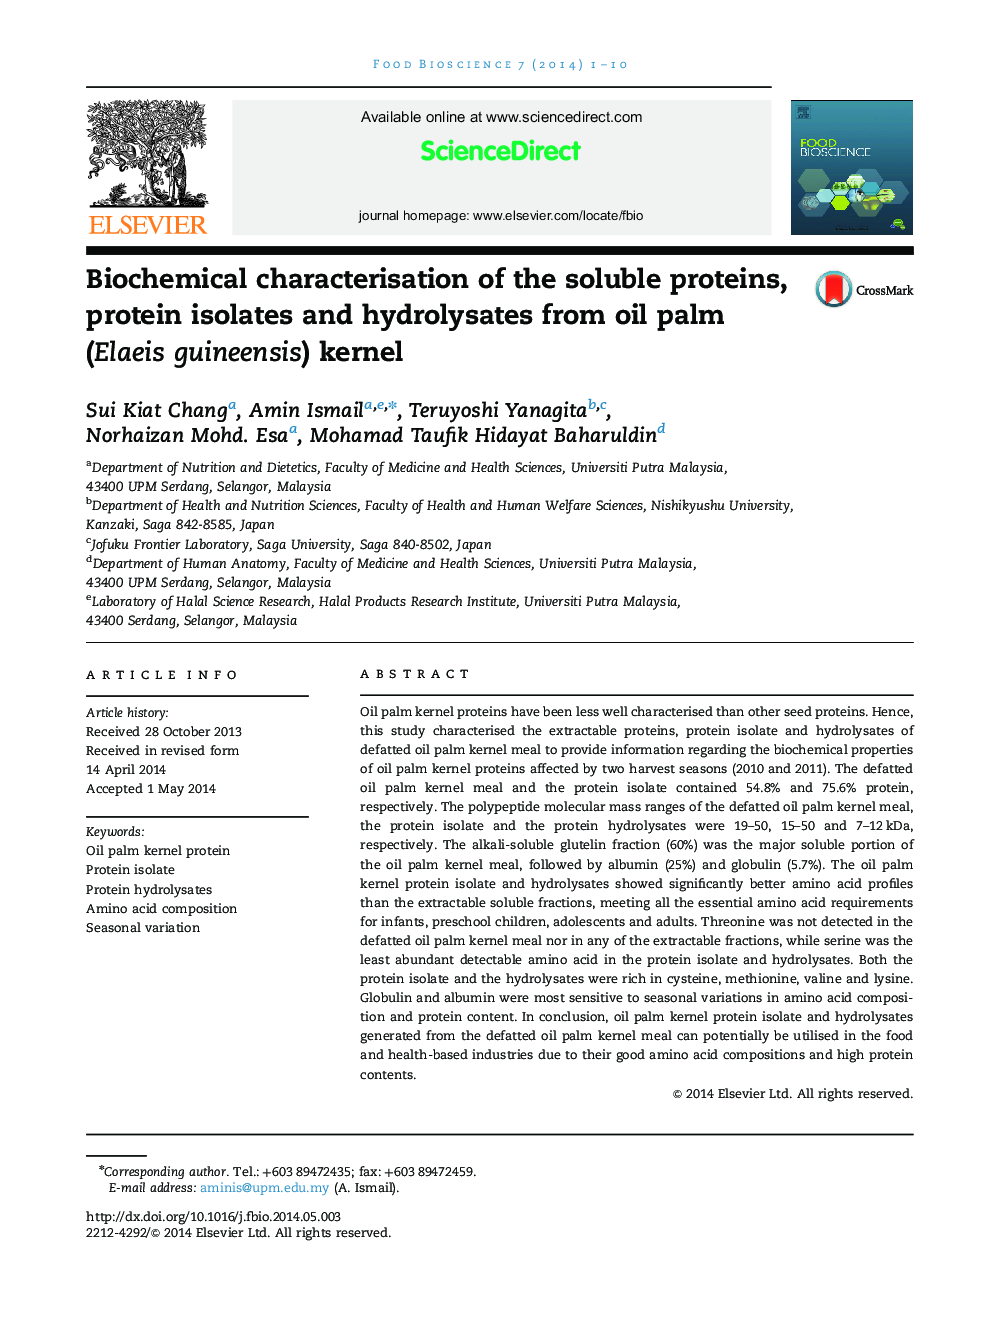 Biochemical characterisation of the soluble proteins, protein isolates and hydrolysates from oil palm (Elaeis guineensis) kernel